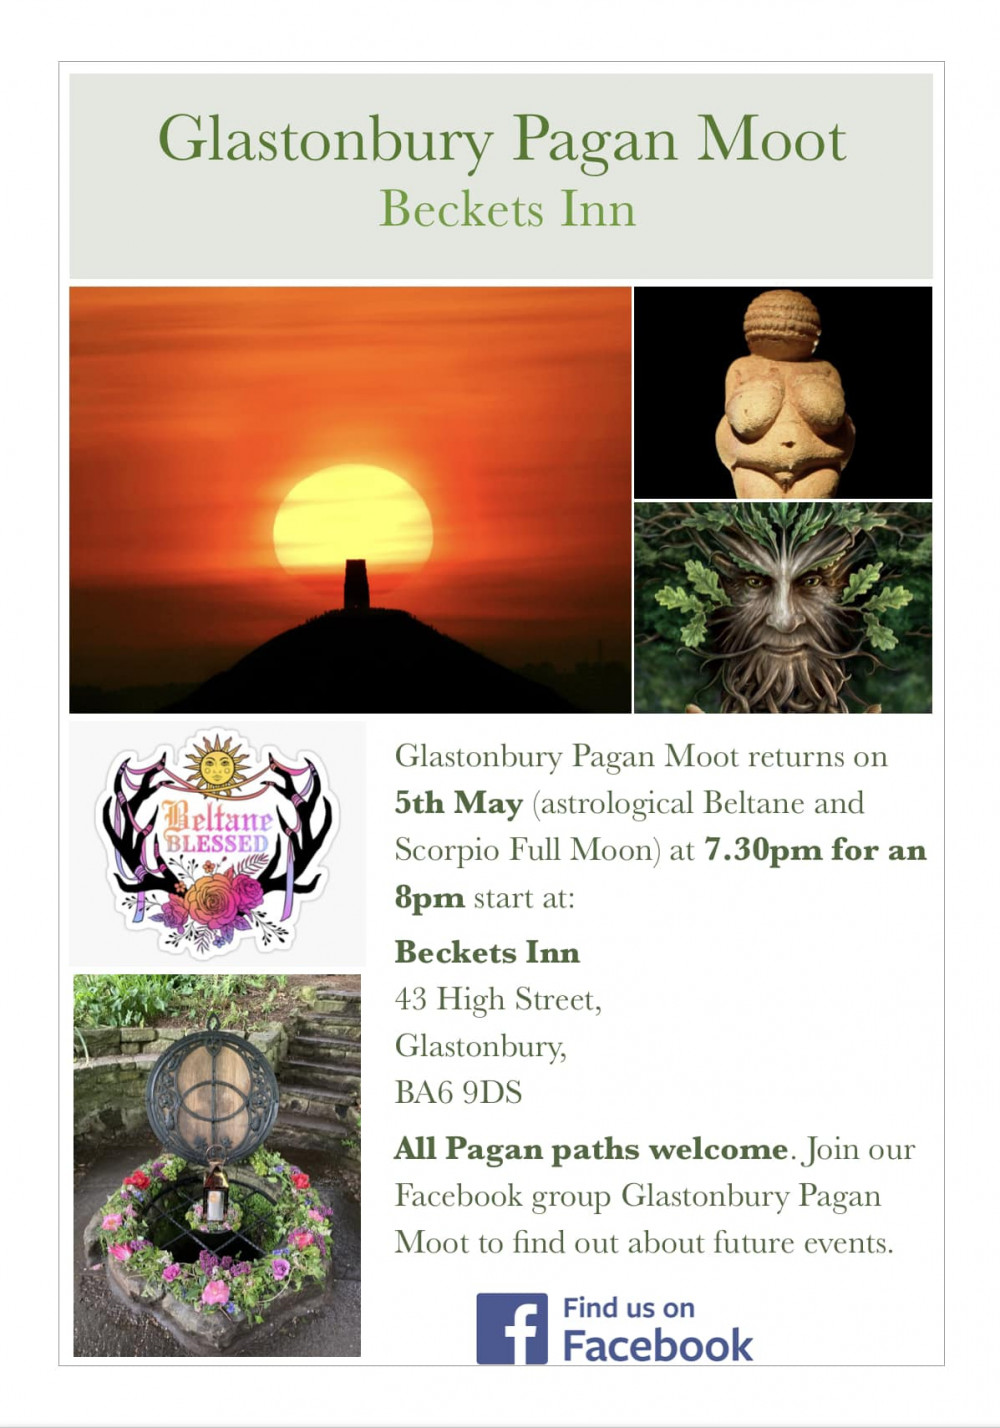 Glastonbury Pagan Moot returns on 5th May (astrological Beltane and Scorpio Full Moon)